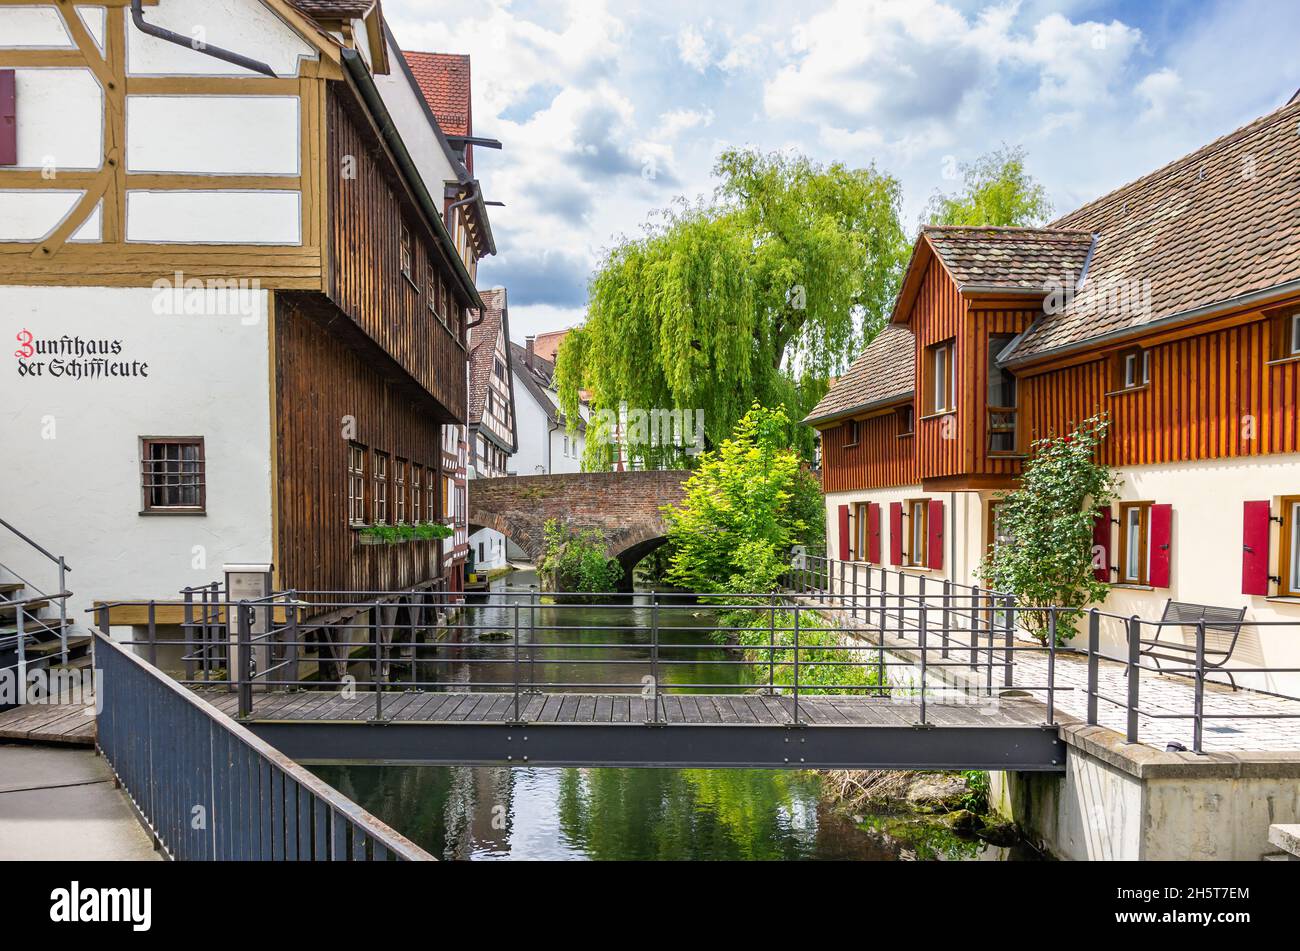 Ulm, Baden-Württemberg, Germany - May 16, 2014: On the way in the fishermen's quarter - The Guild House of the Shipmen (Zunfthaus der Schiffleute). Stock Photo